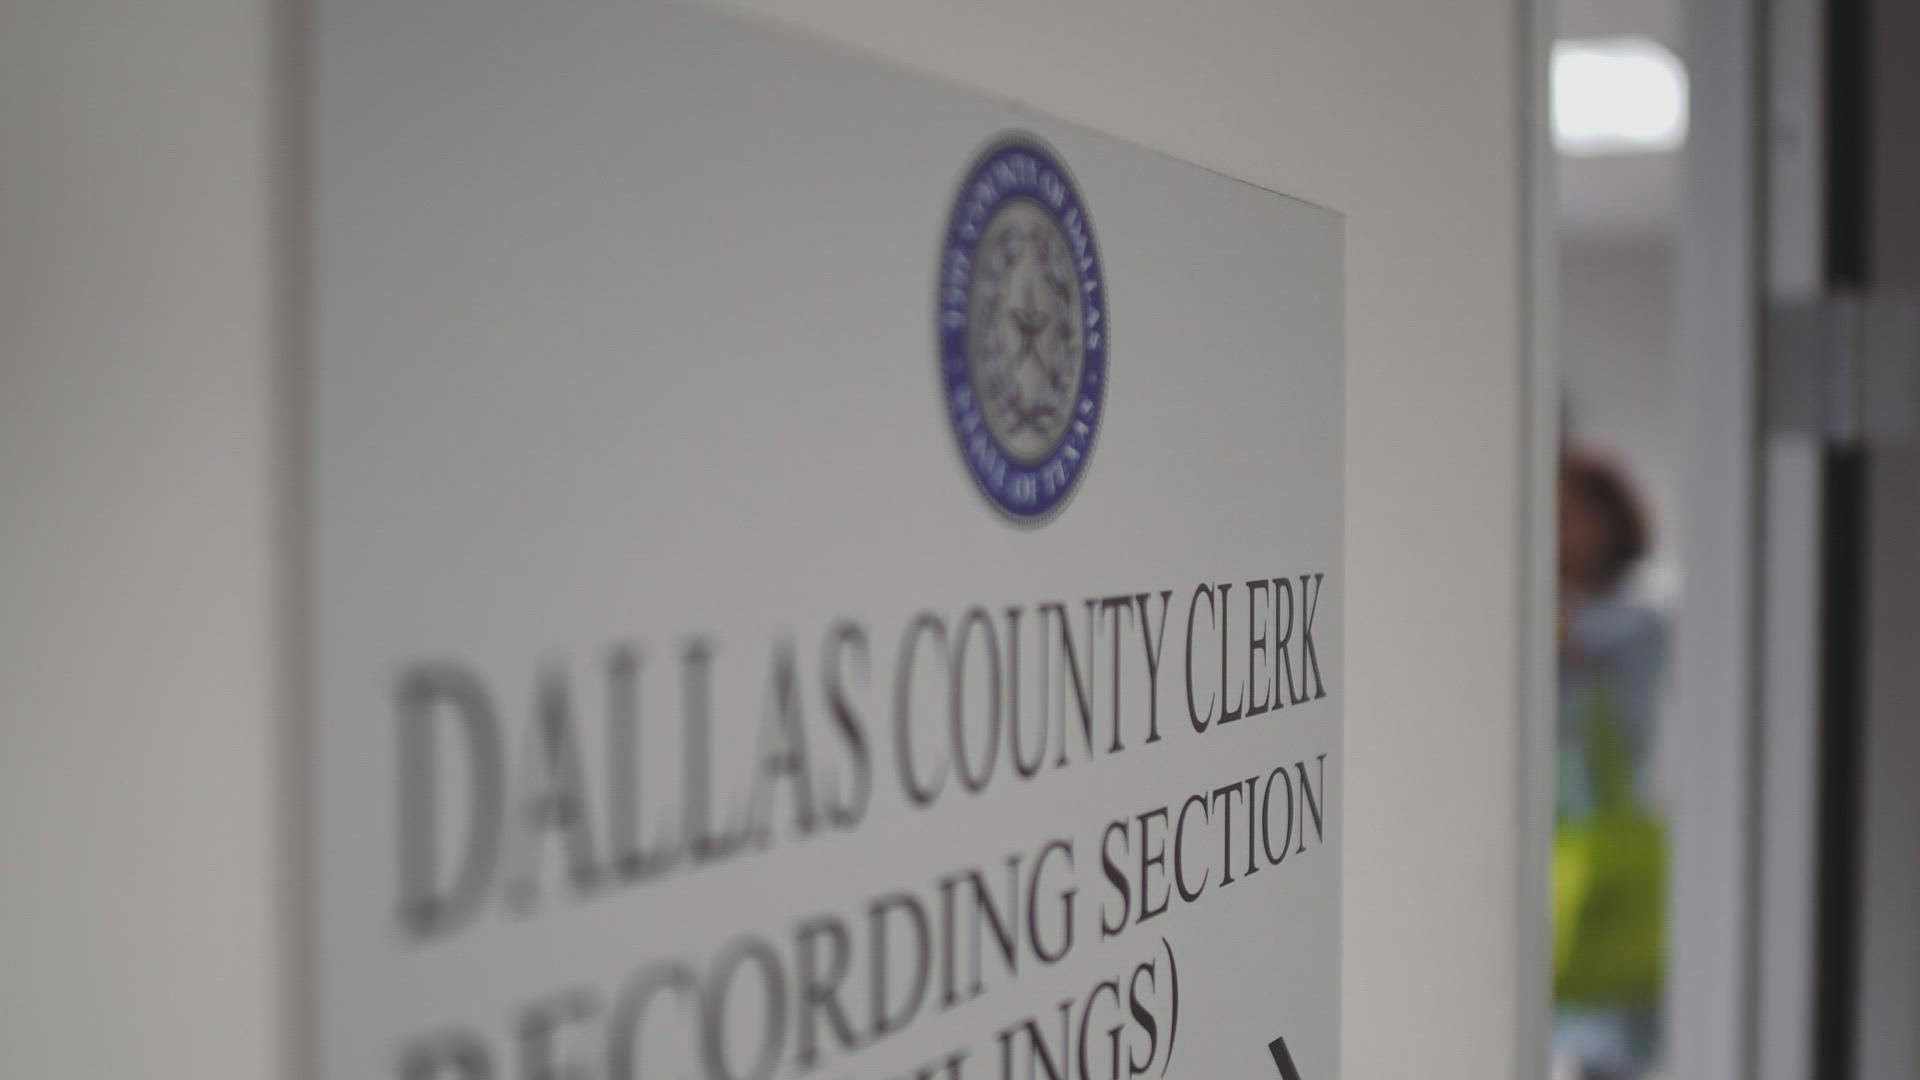 Every year, there are more than 400,000 documents filed with the Dallas County Clerk’s Office. Some of those documents are forged property deeds.